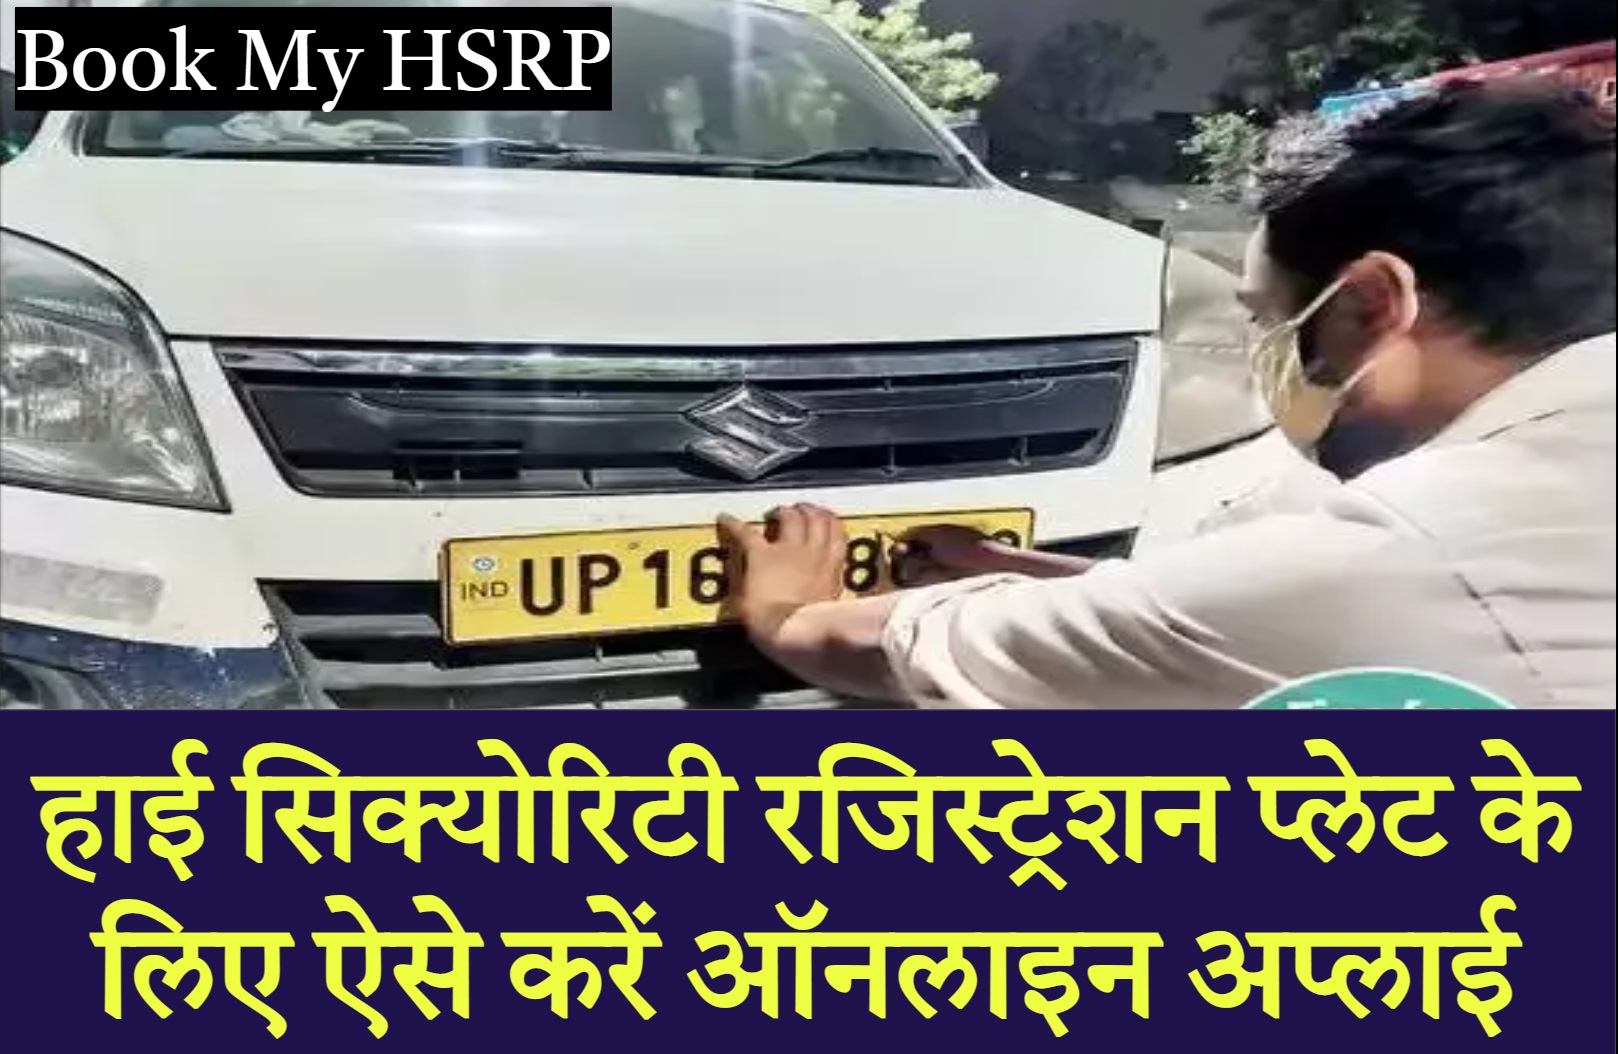 High Security Registration Plates (HSRP) for Vehicles – Book My HSRP UP